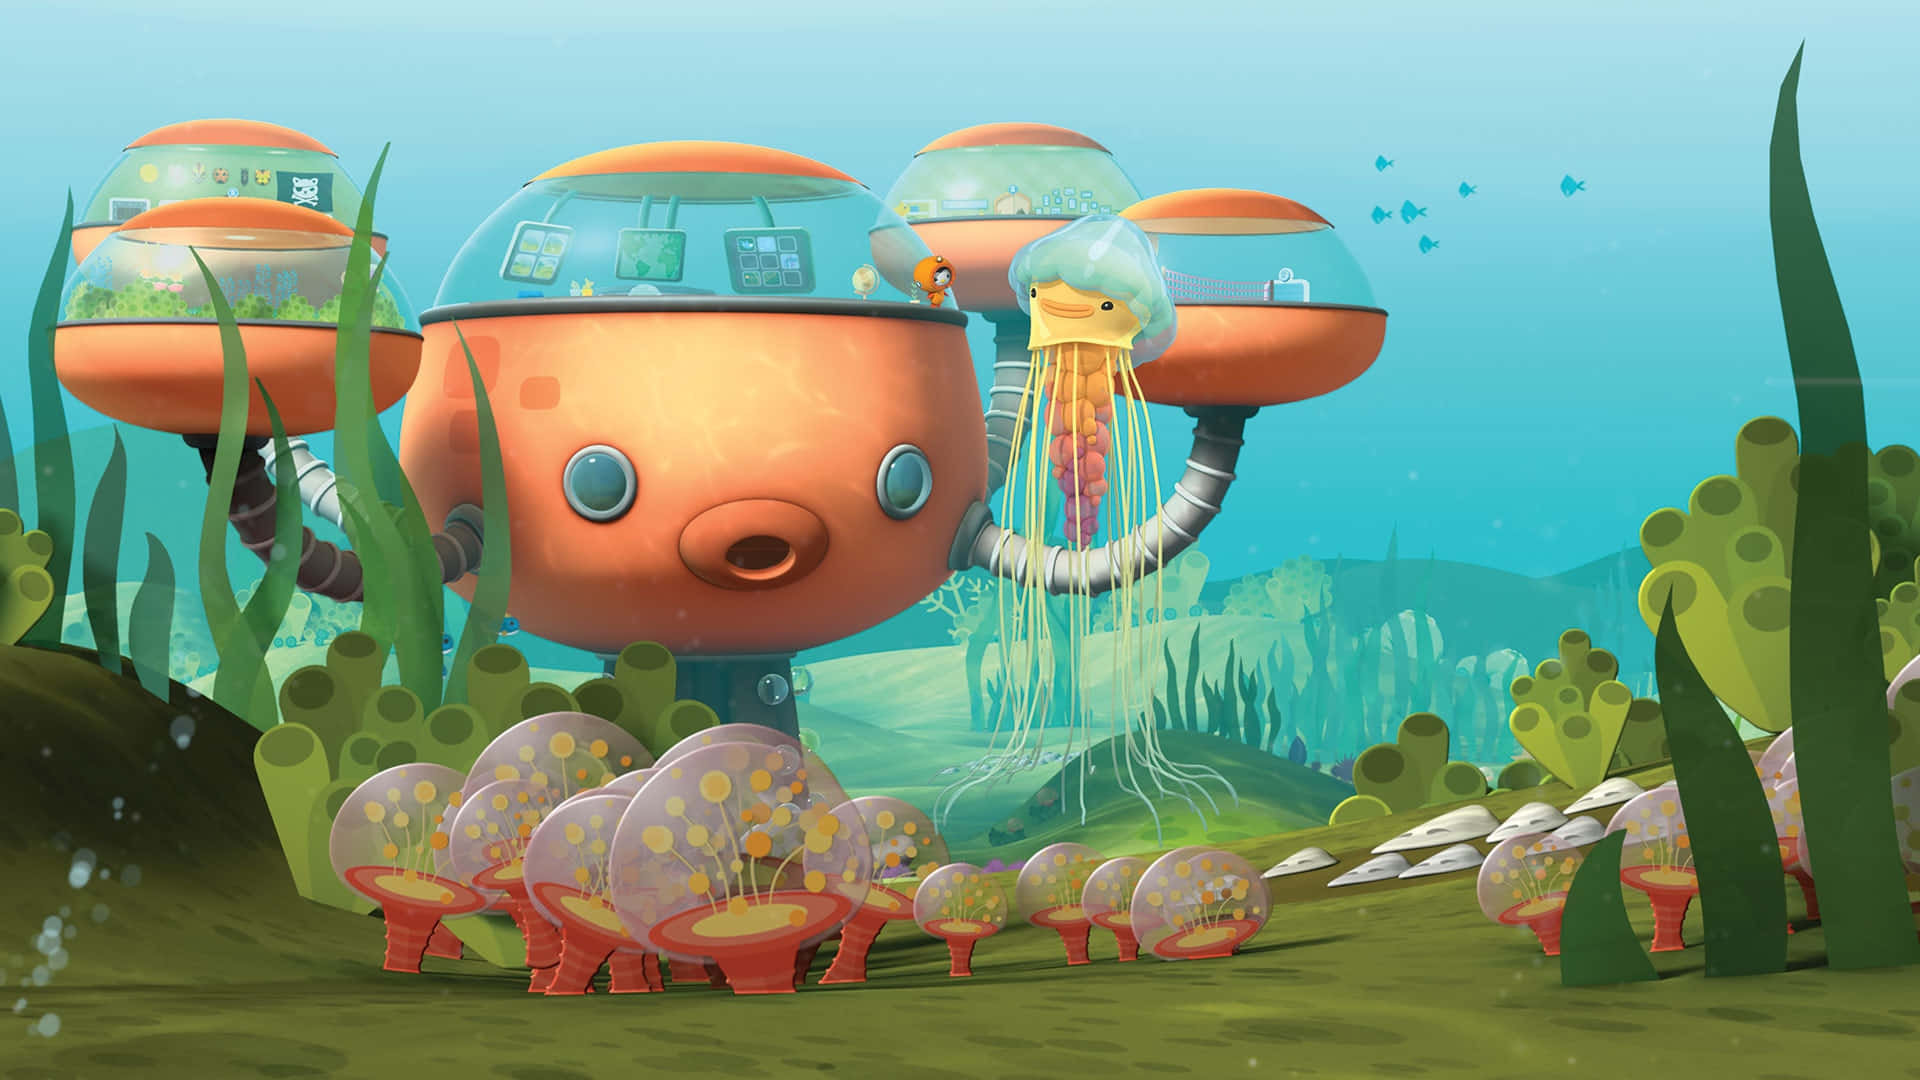 Explore the world of adventure with the Octonauts! Wallpaper